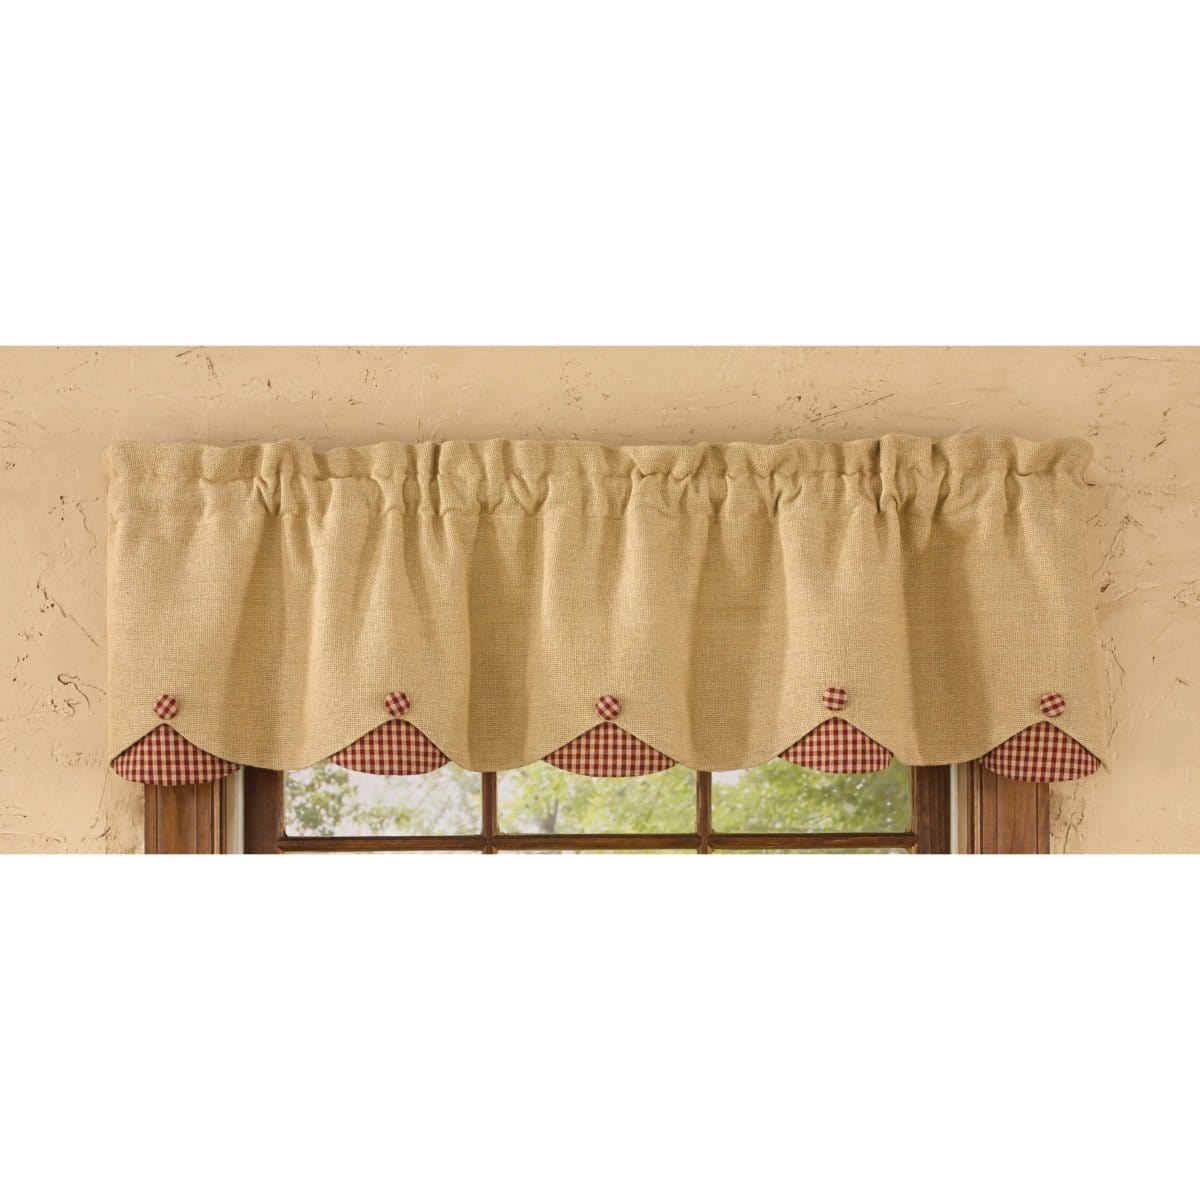 Burlap &amp; Check In Wine Scalloped Valance Lined-Park Designs-The Village Merchant